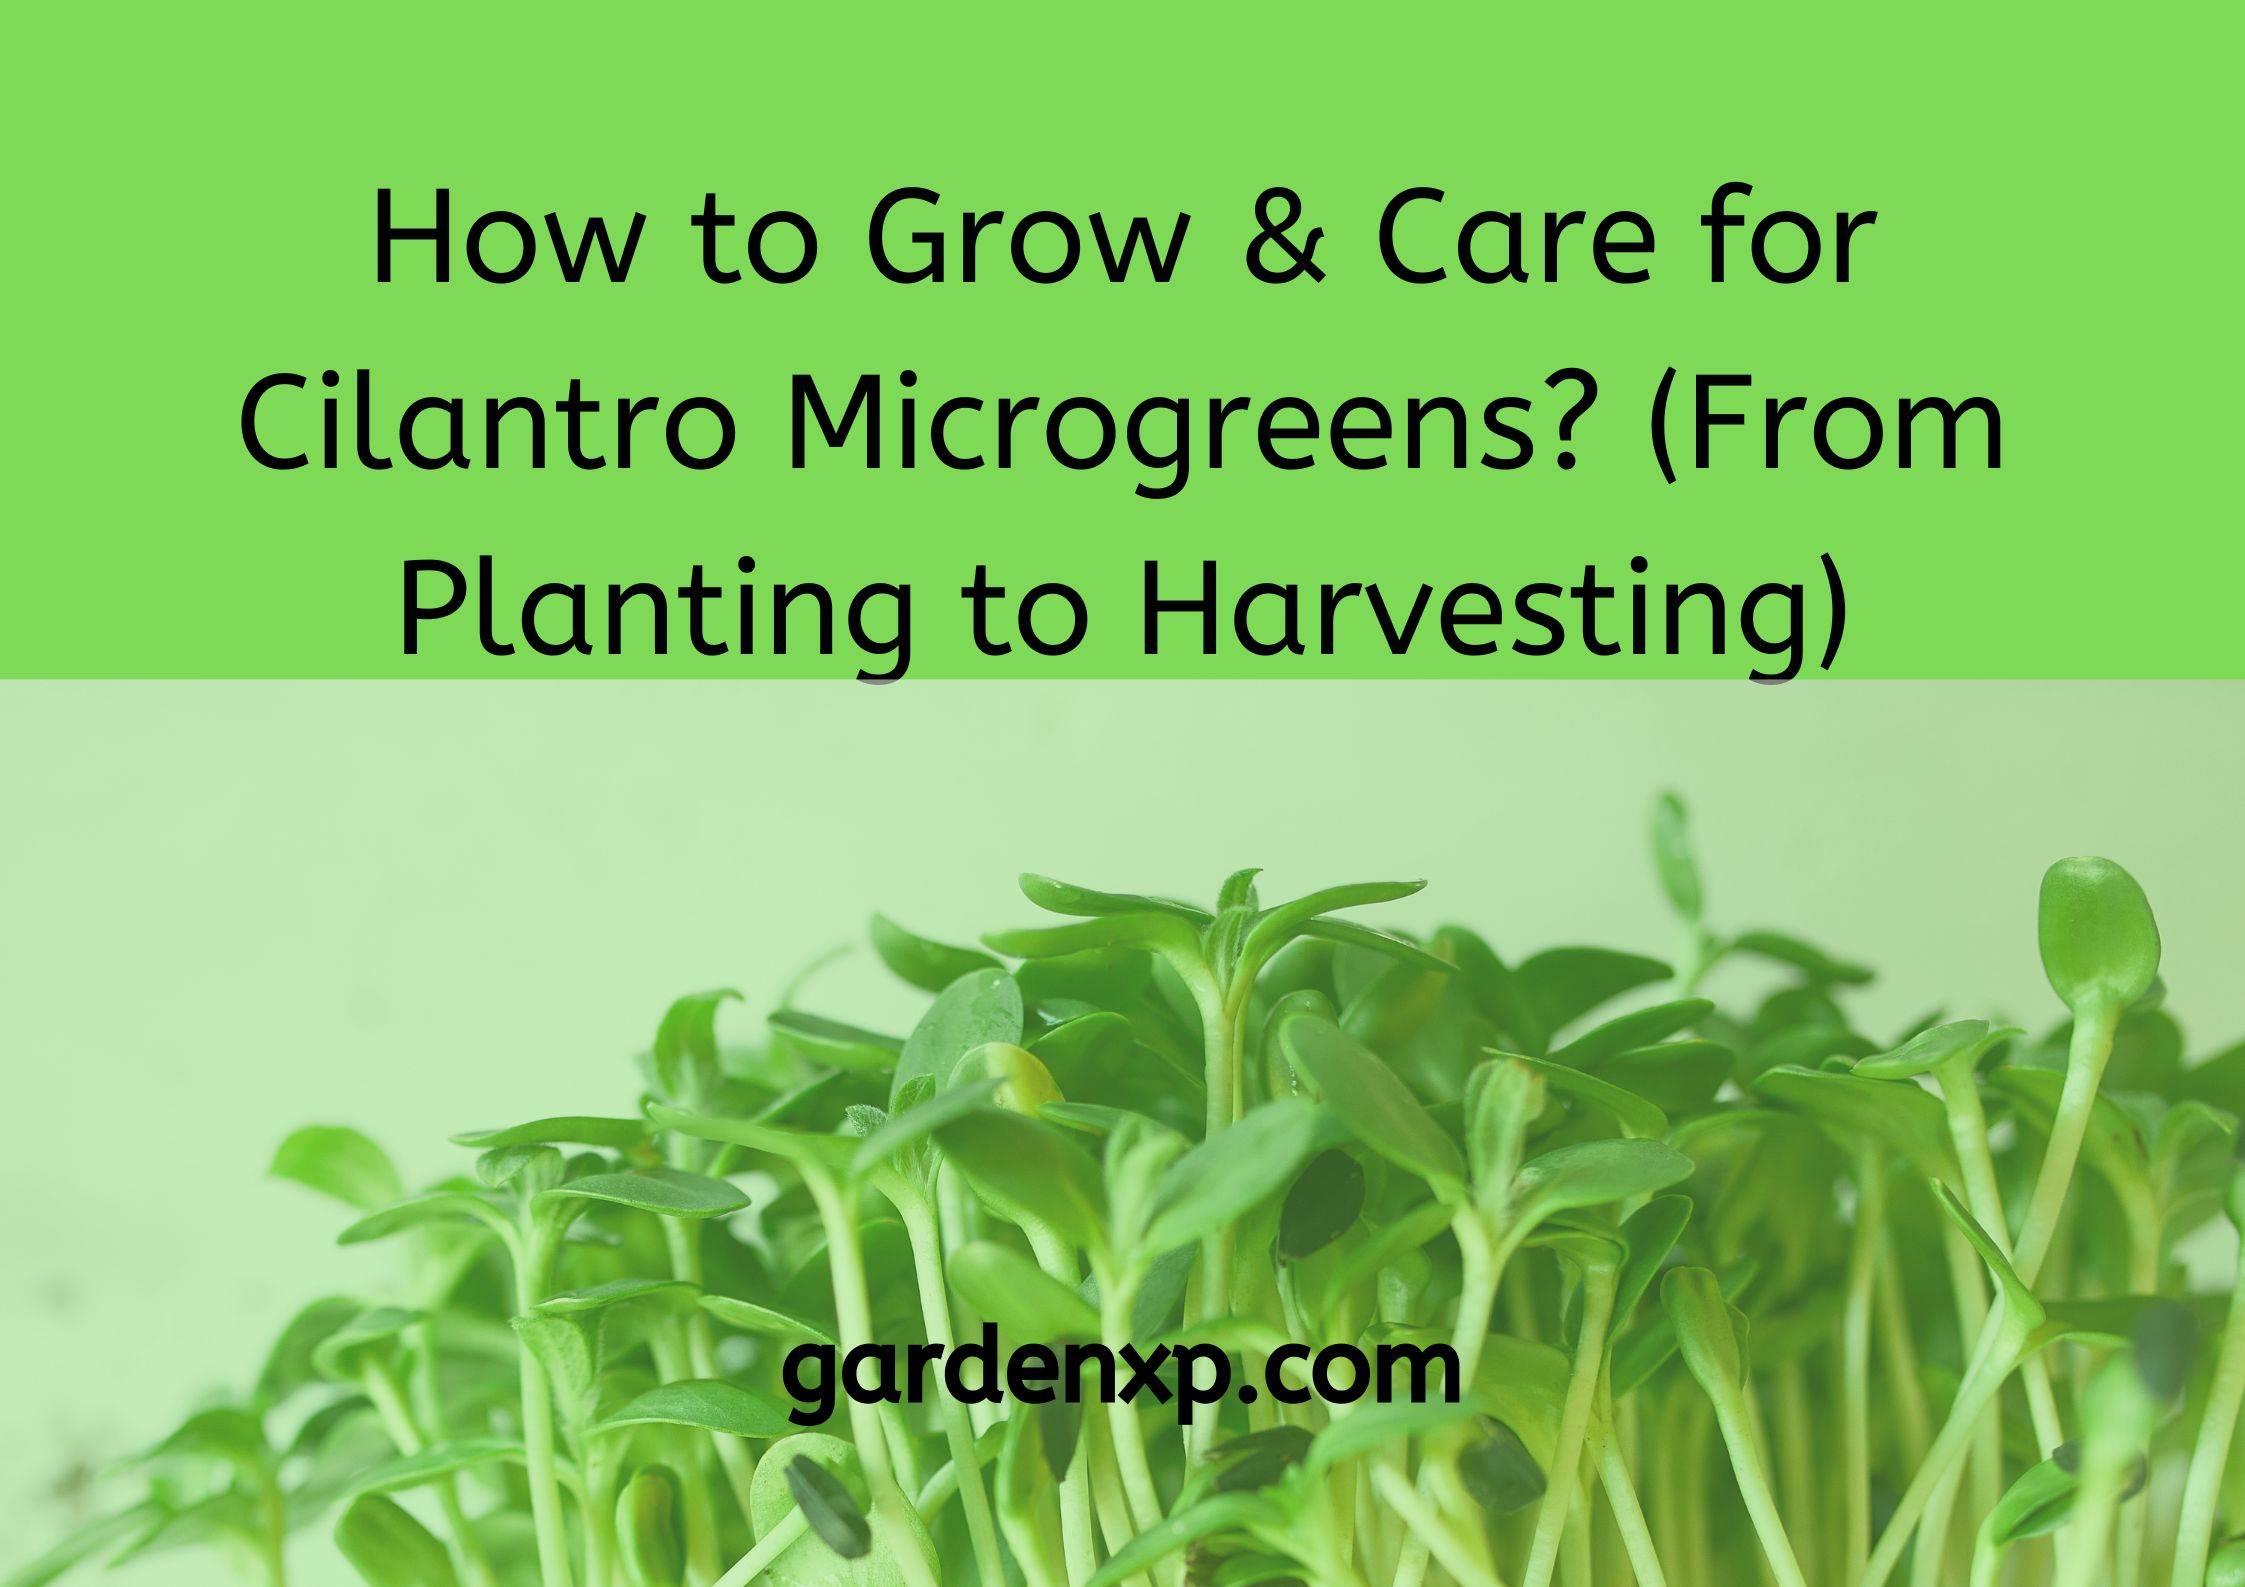 How to Grow & Care for Cilantro Microgreens? (From Planting to Harvesting)